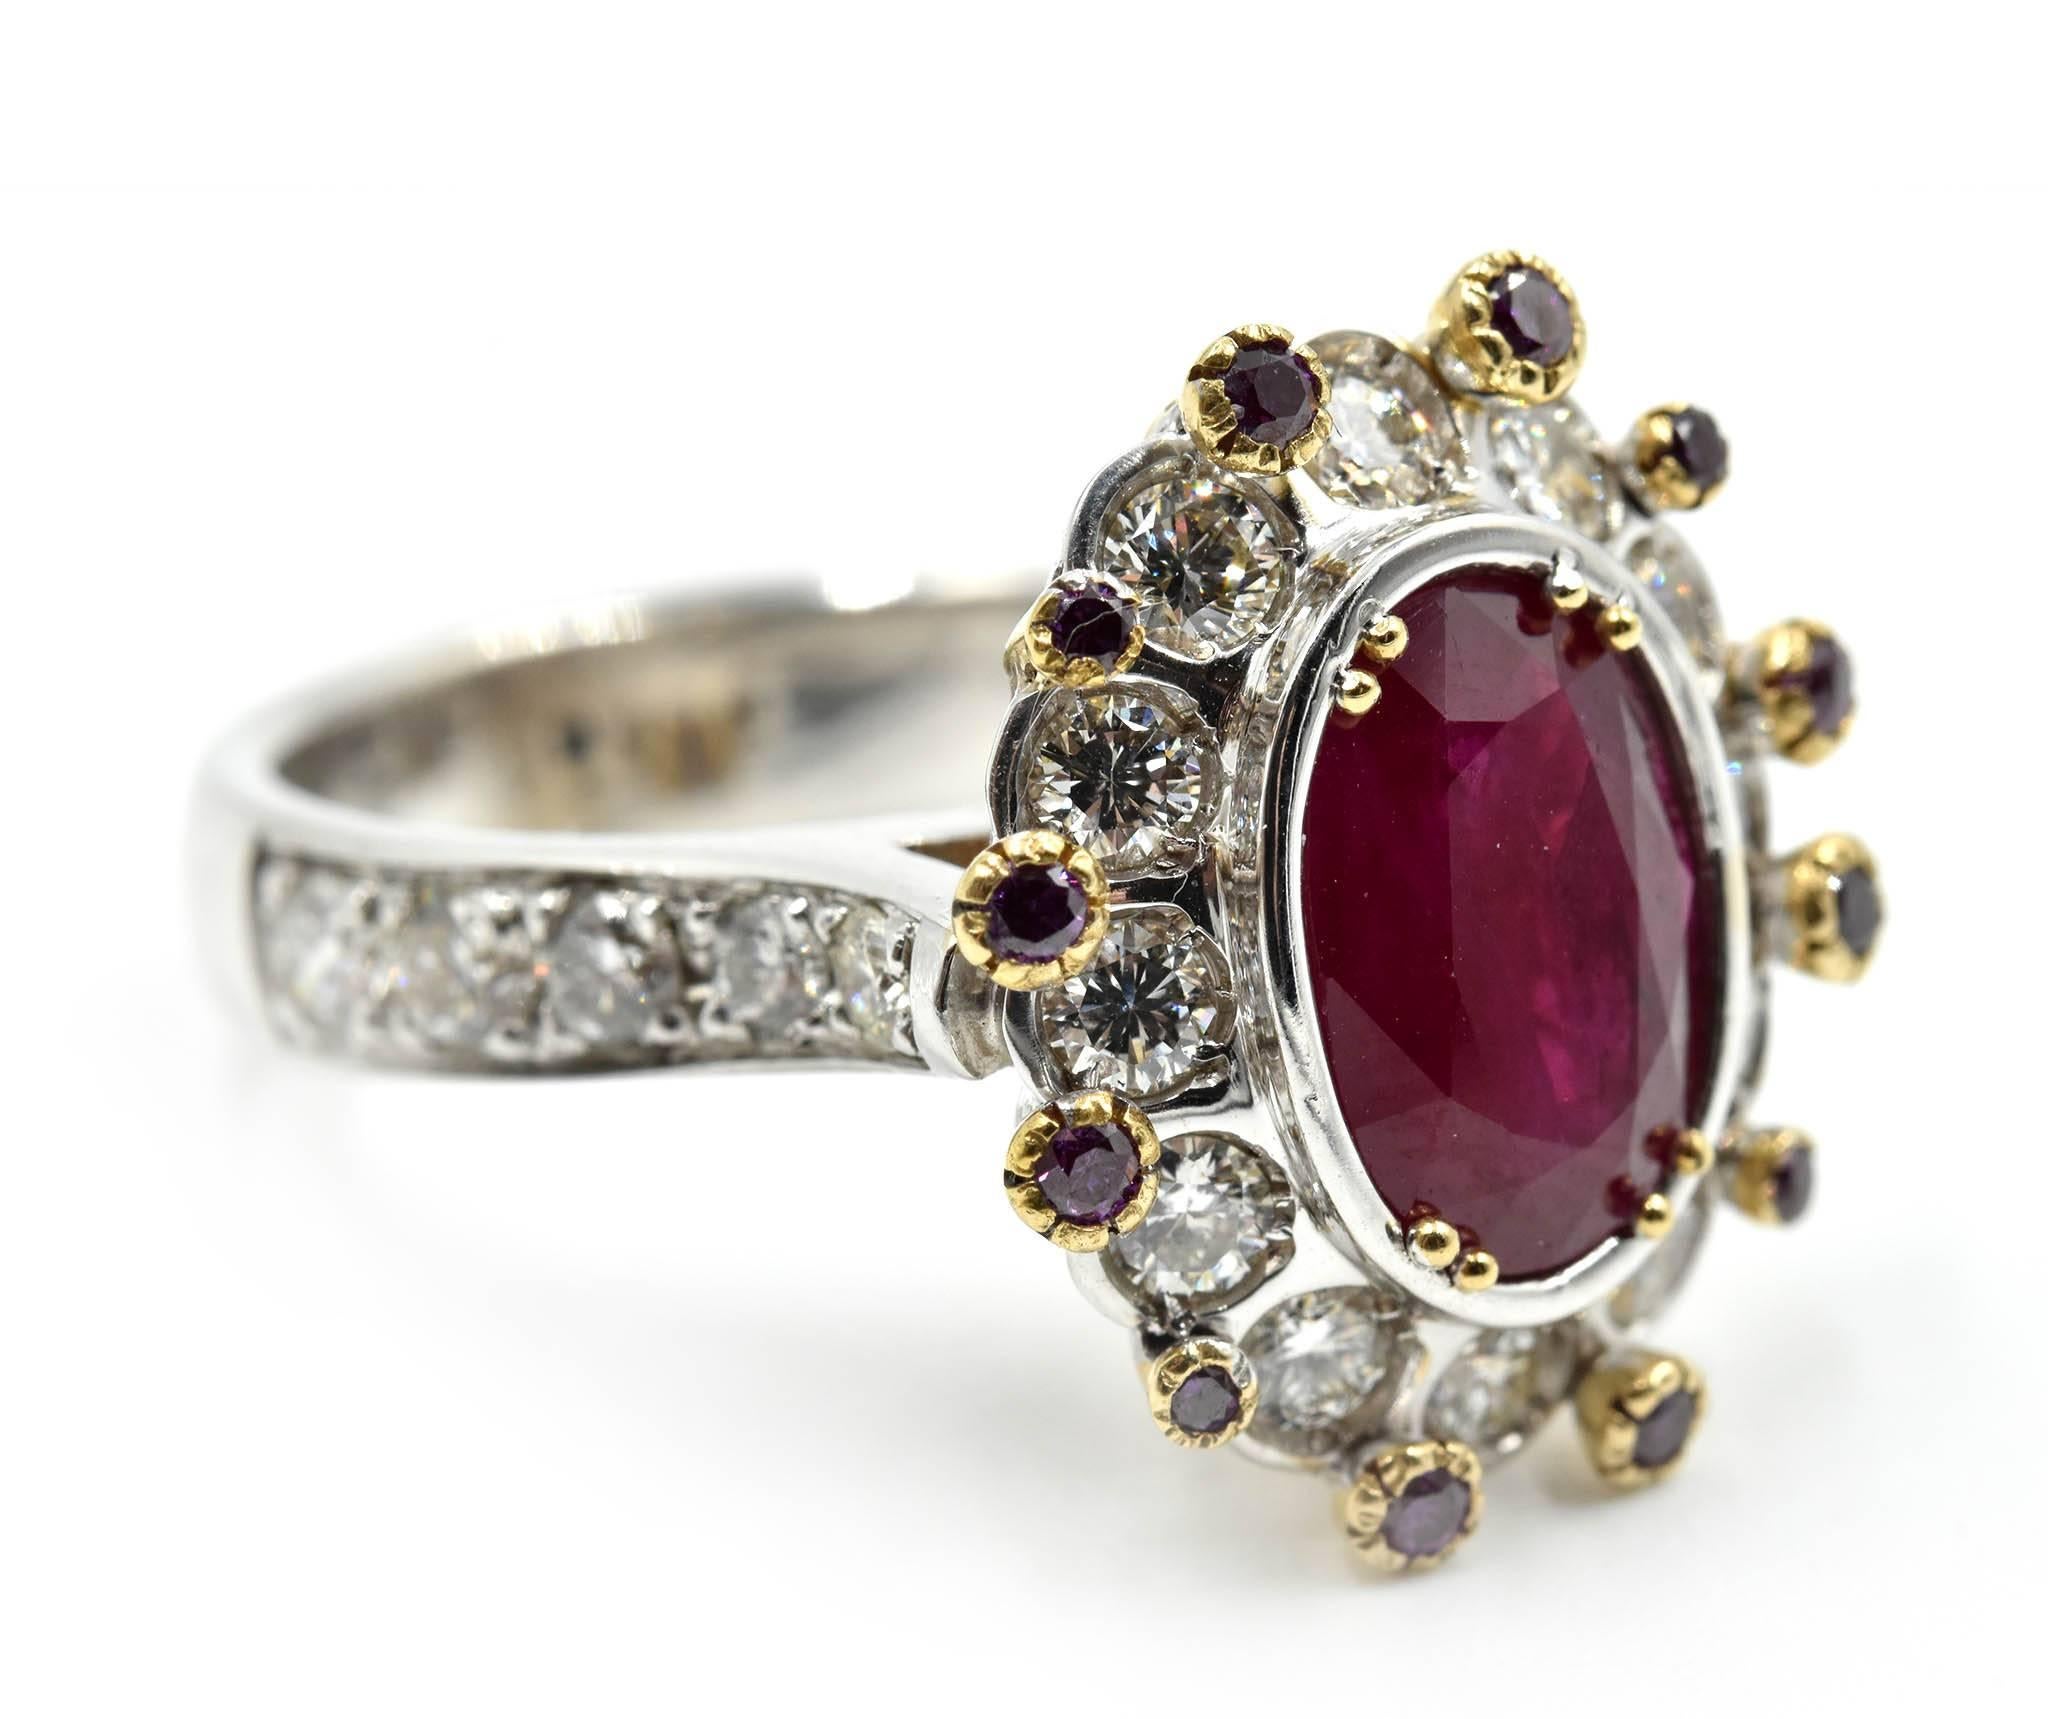 Rare and untreated, this all-natural 3.91ct Burma ruby is stunning in this 14k yellow and white gold setting! The oval cut ruby is surrounded by a round brilliant white diamond halo. Total weight of the white diamonds is 1.44 carats. There are 12